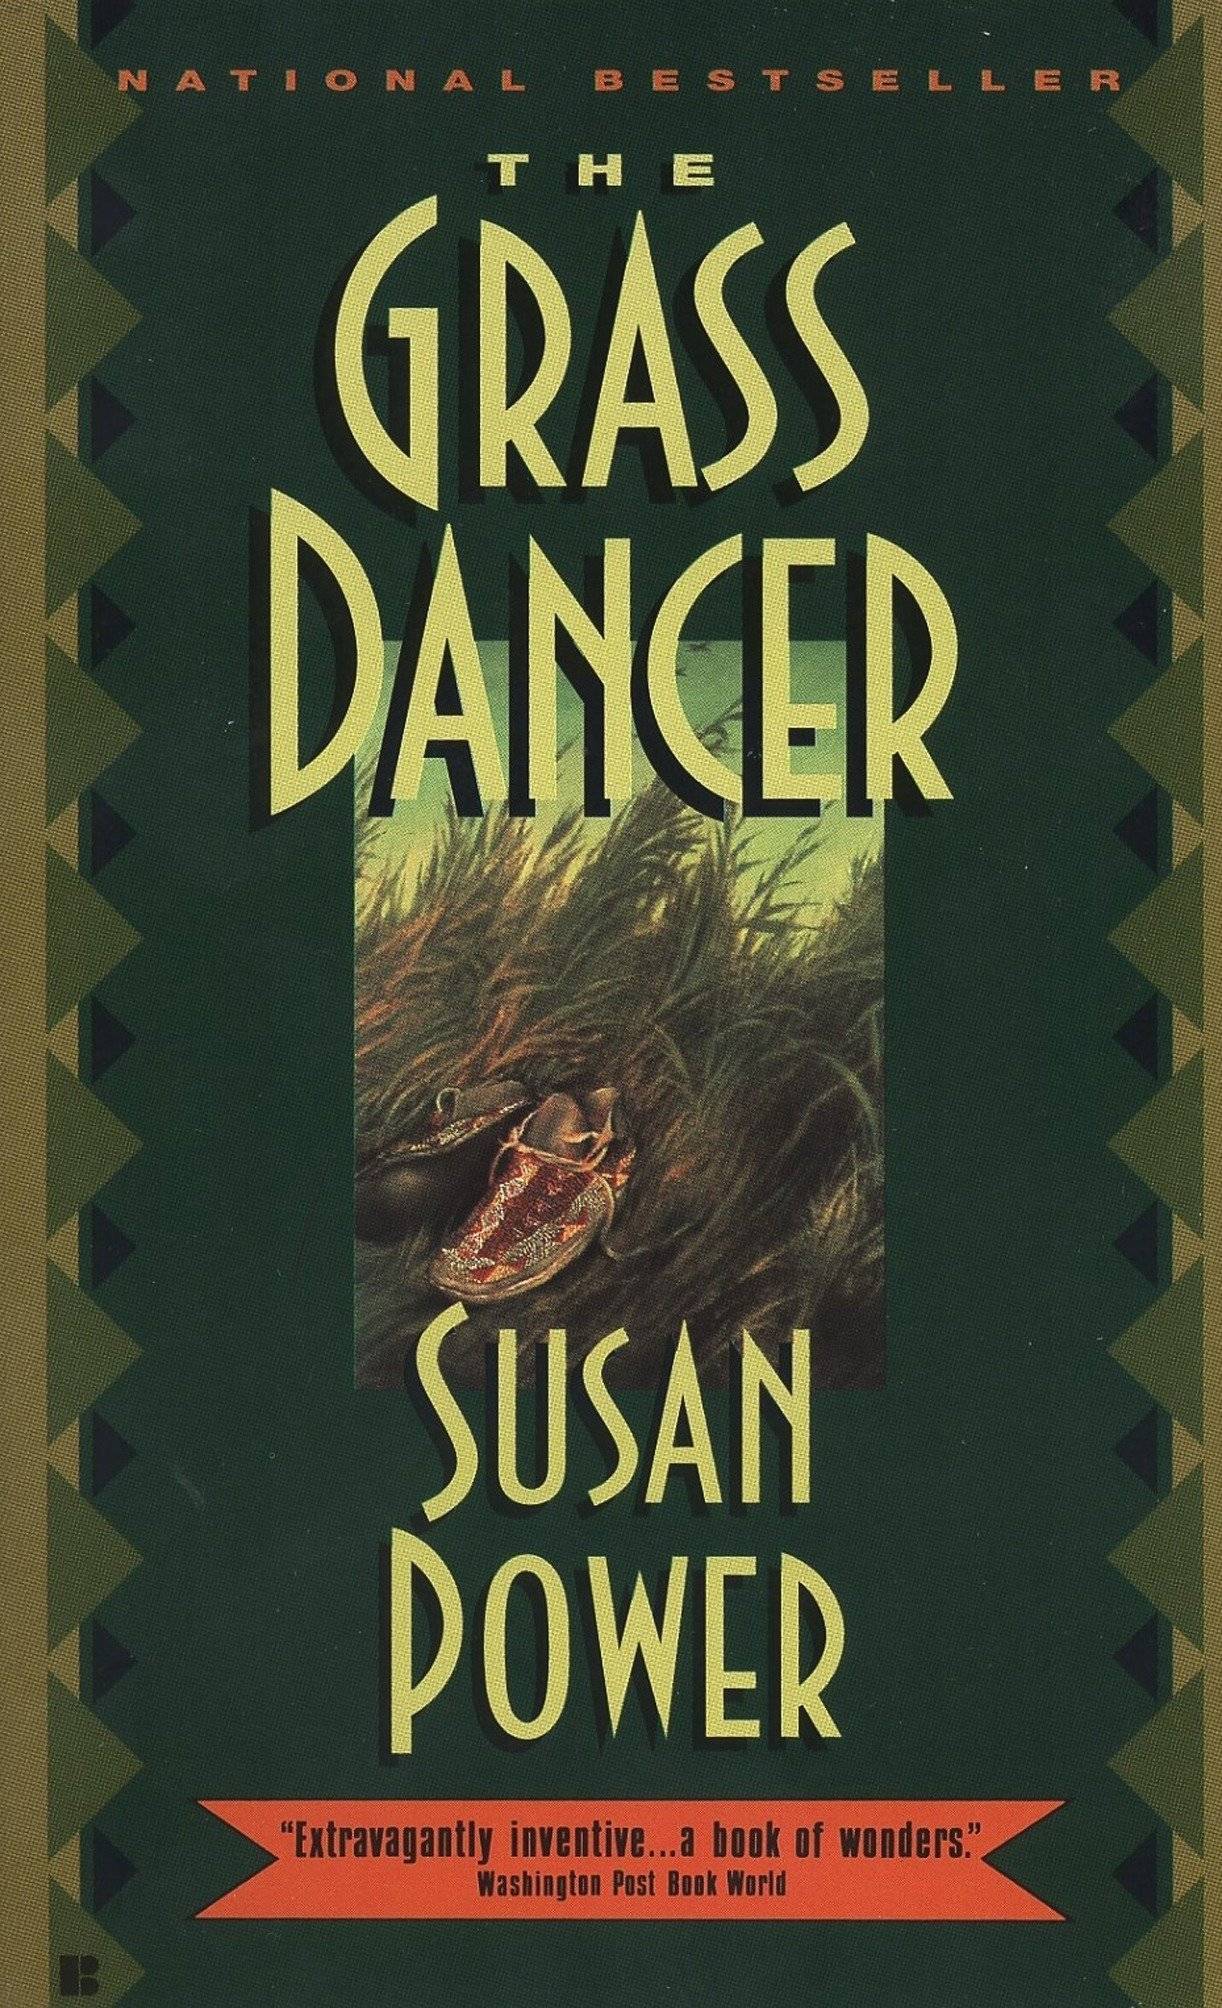 Book cover with an illustration of shoes in tall grass